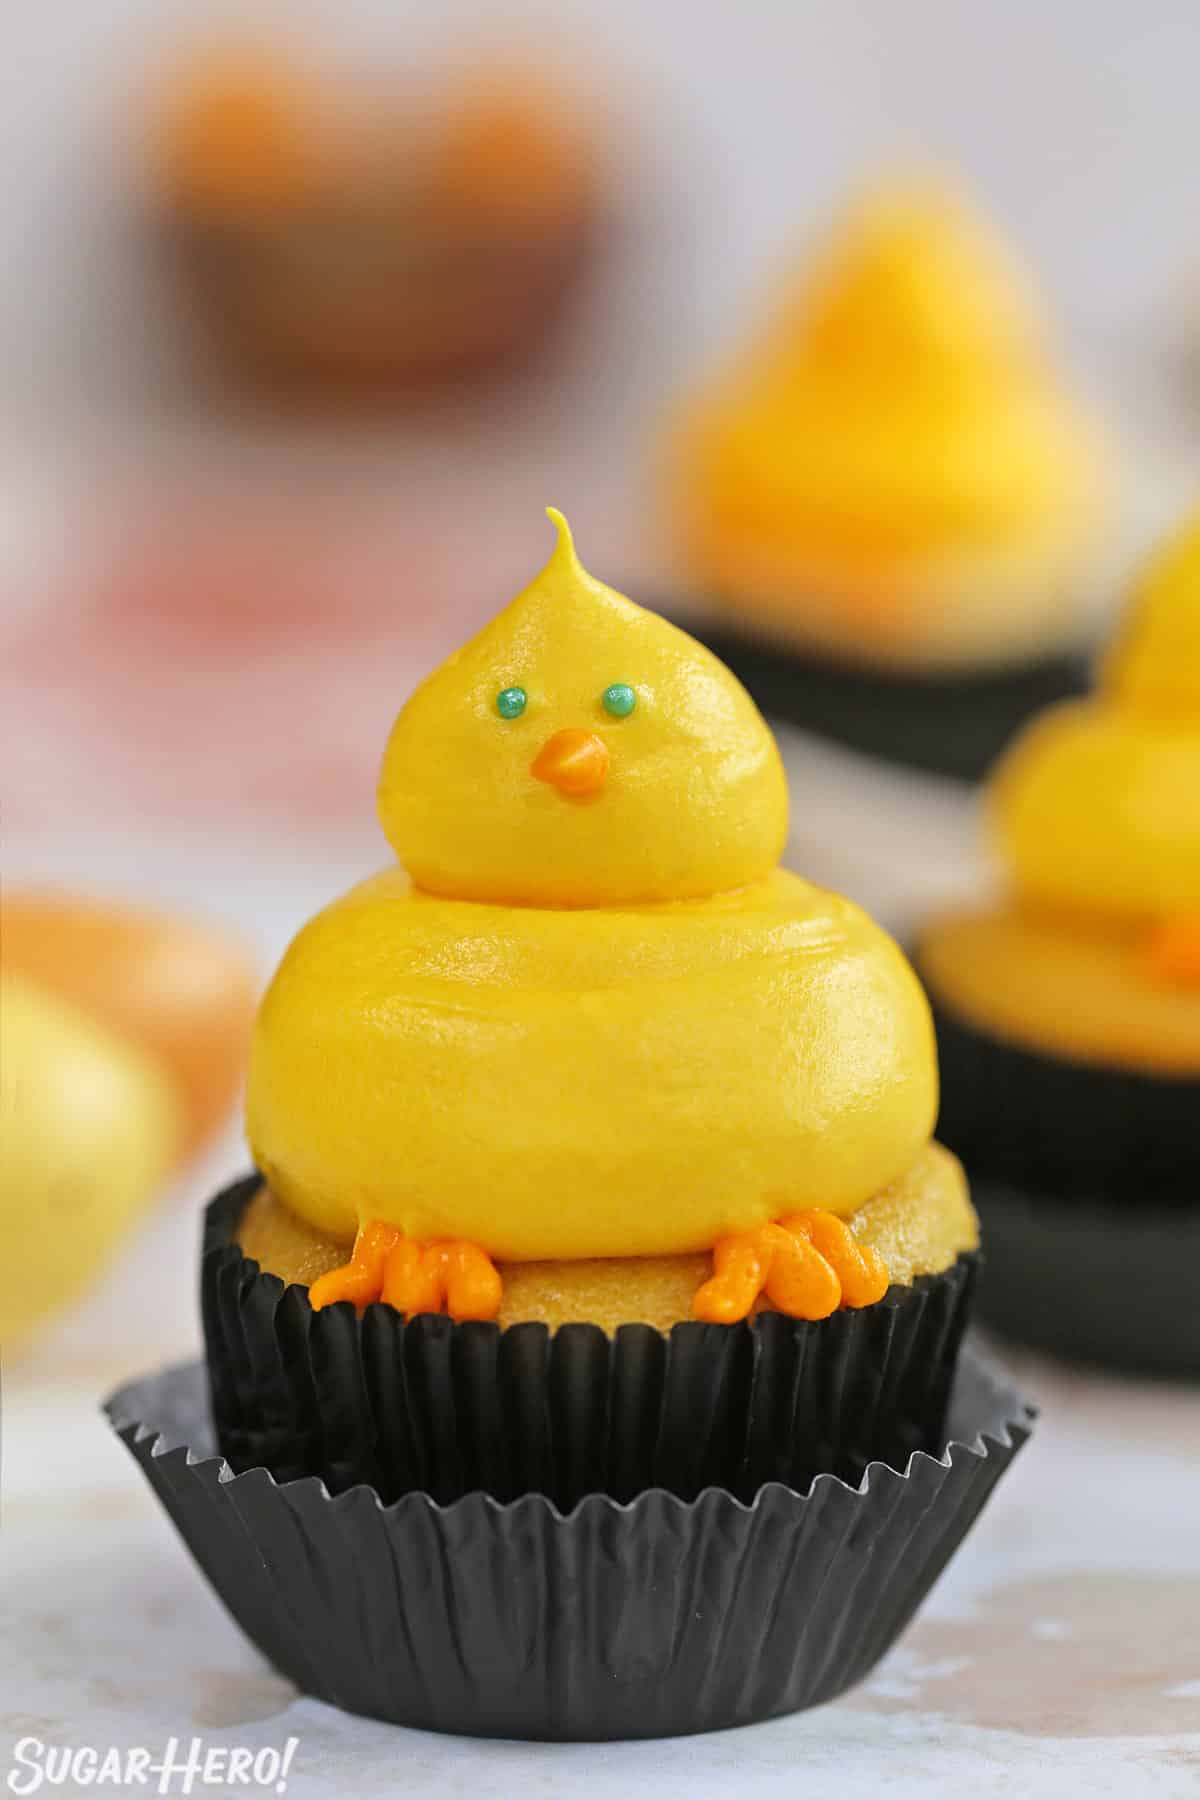 Close up of a Baby Chick Cupcake on a marble surface, with eggs in the background.